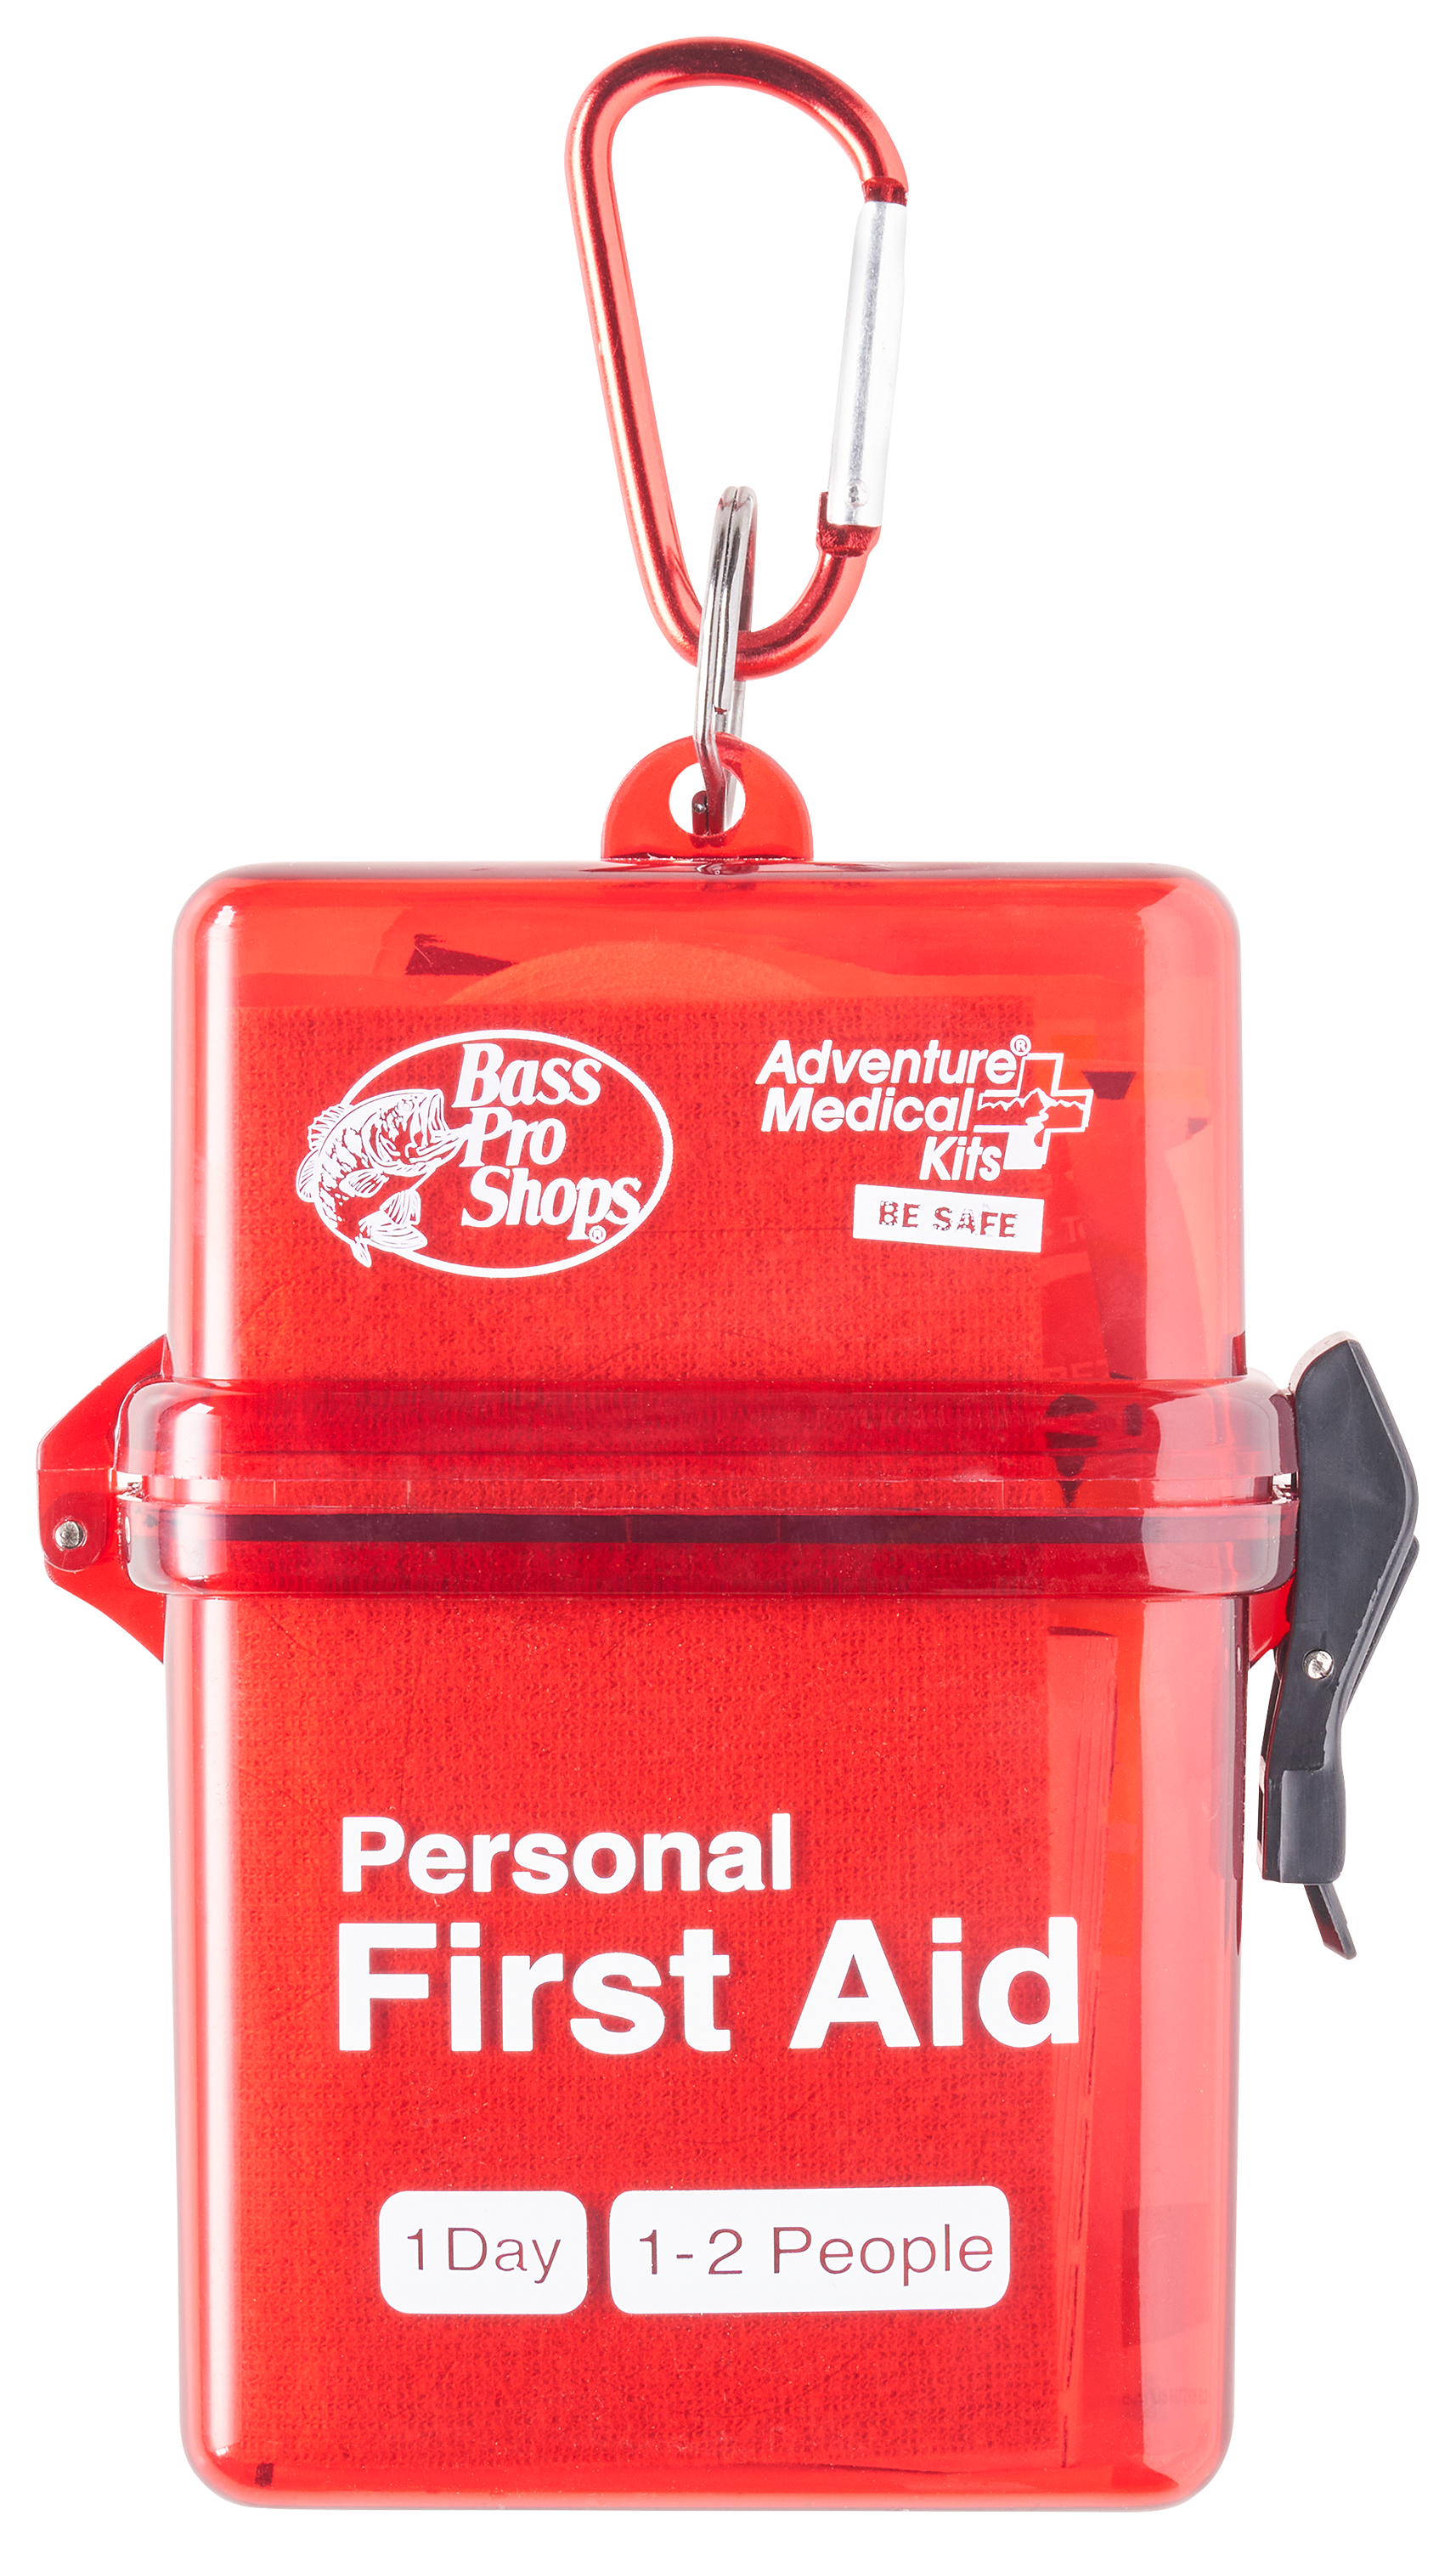 Bass Pro Shops Personal First Aid Kit.